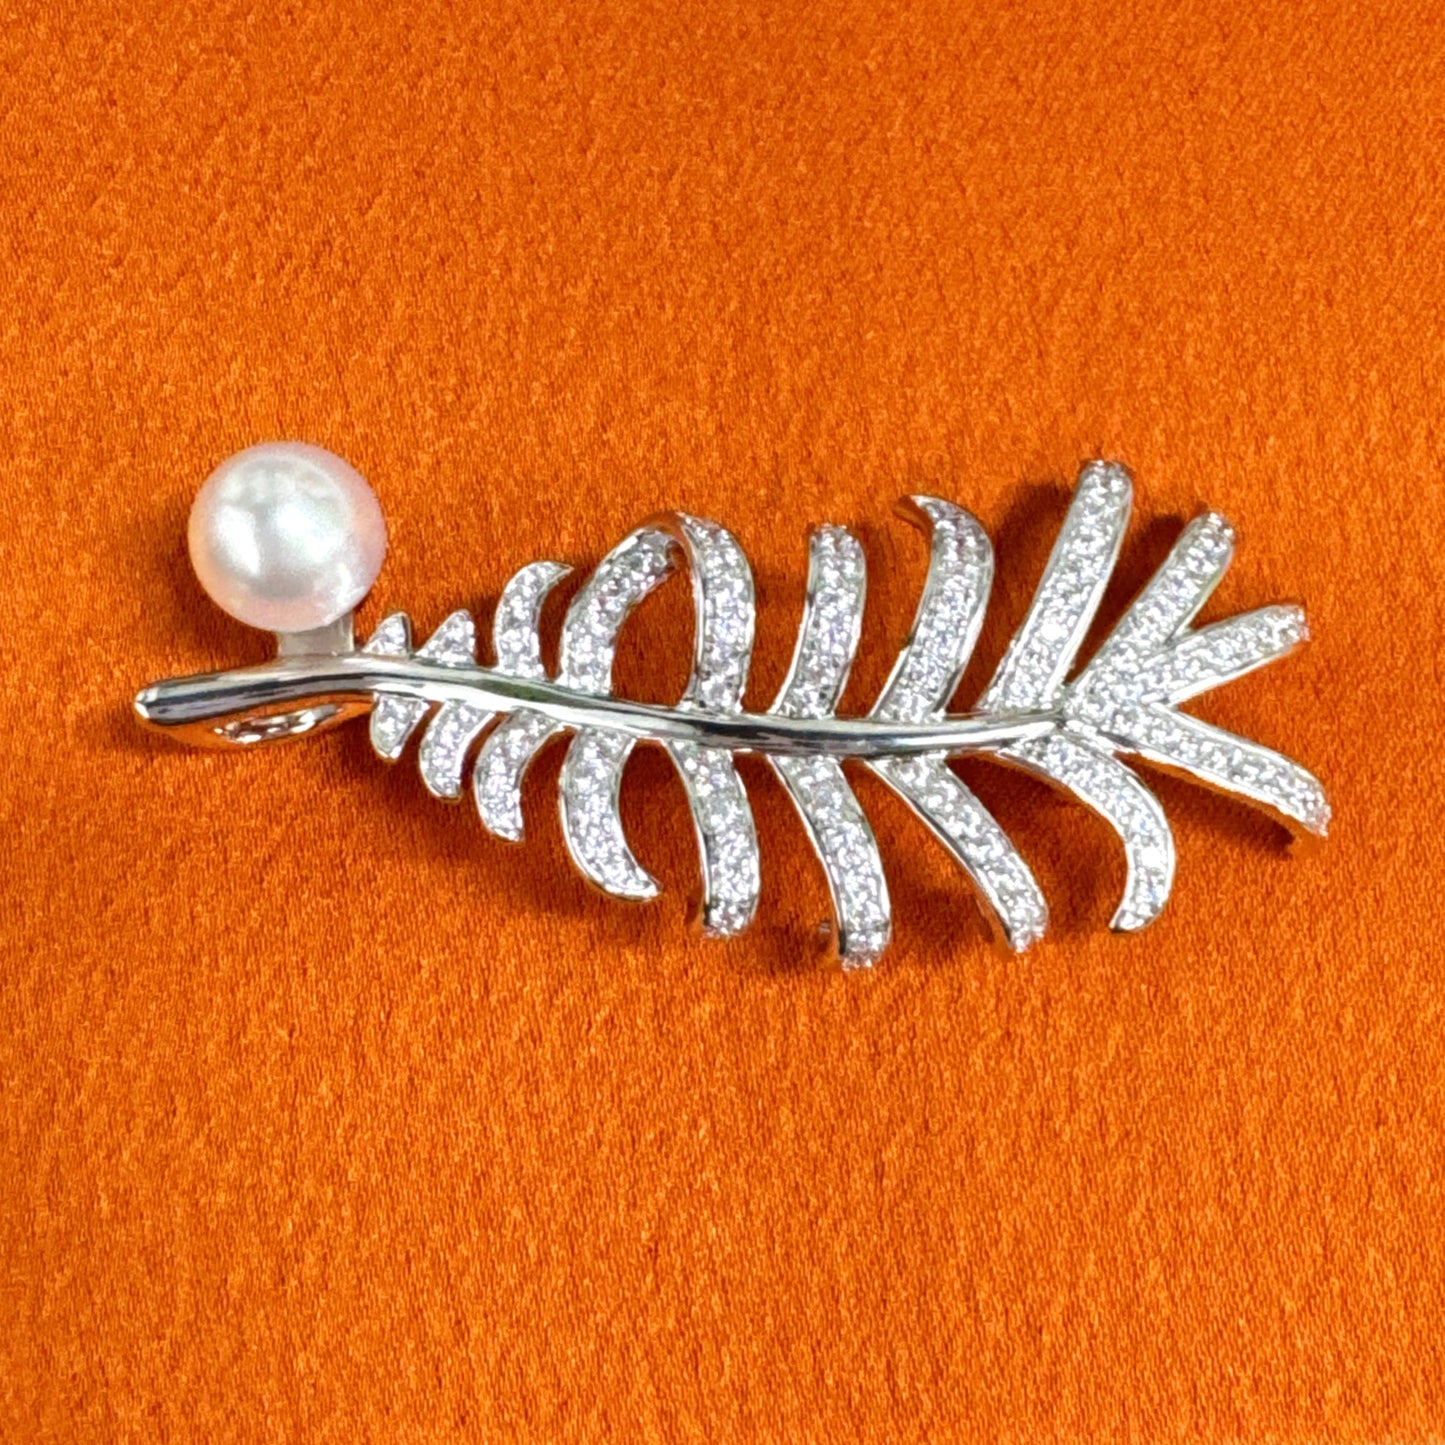 Handmade feather pearl brooch, women's brooches pins, jewelry ring, mother's day gifts, dress accessories,silver feathers broaches crafts DE-LIANG